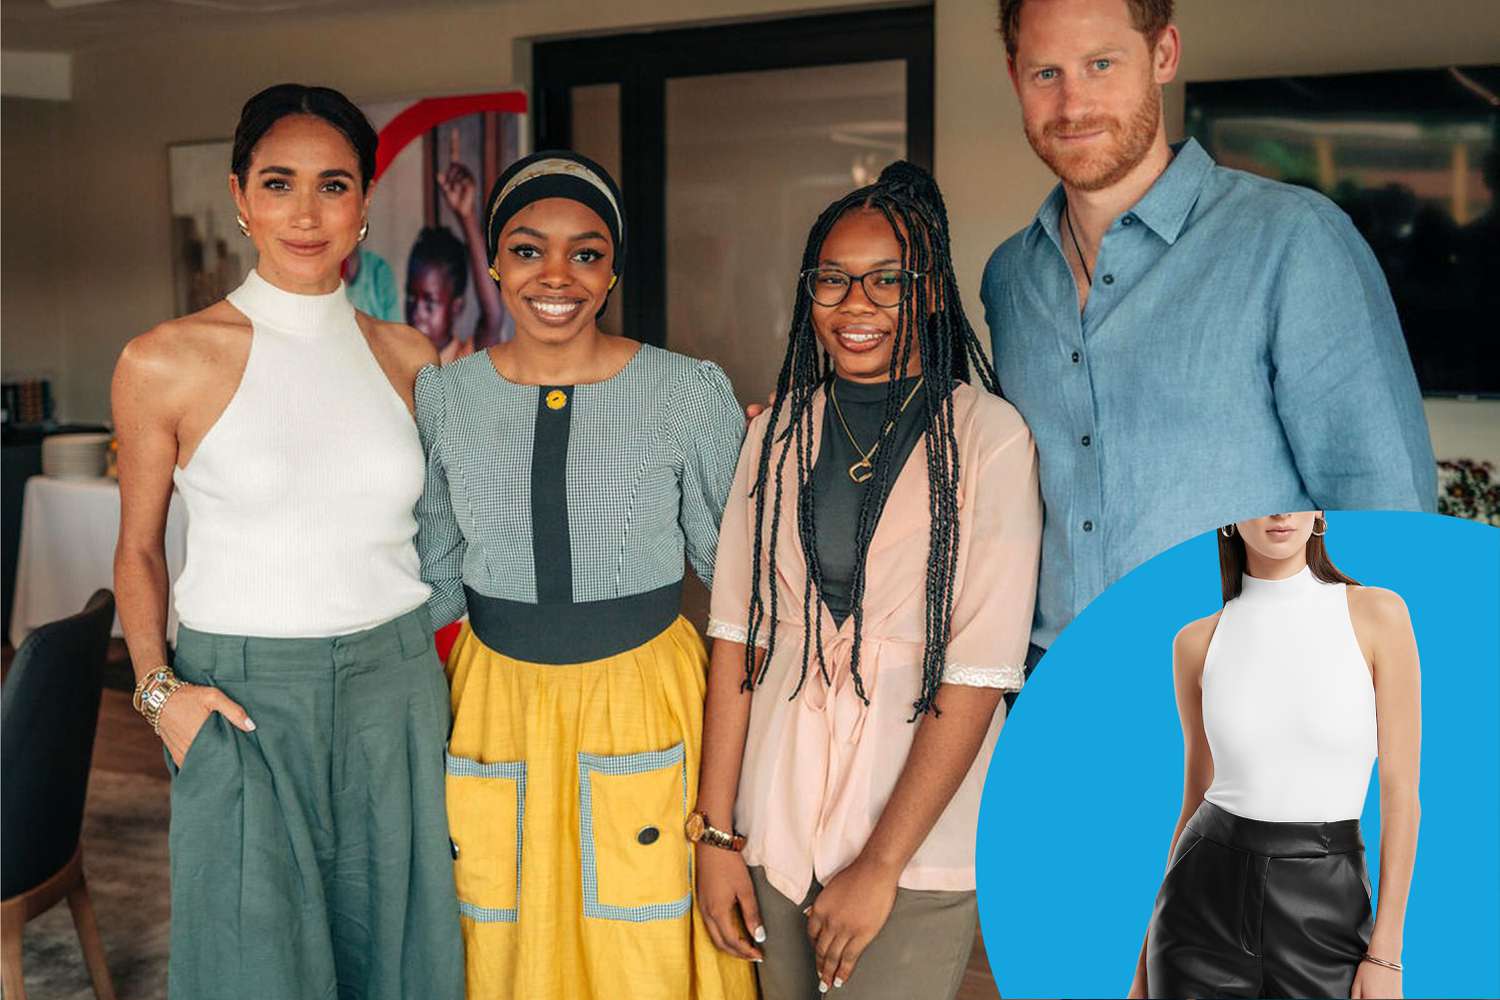 Meghan Markle’s White Halter Top Is This Summer’s Staple Shirt Style — Get the Look from $14